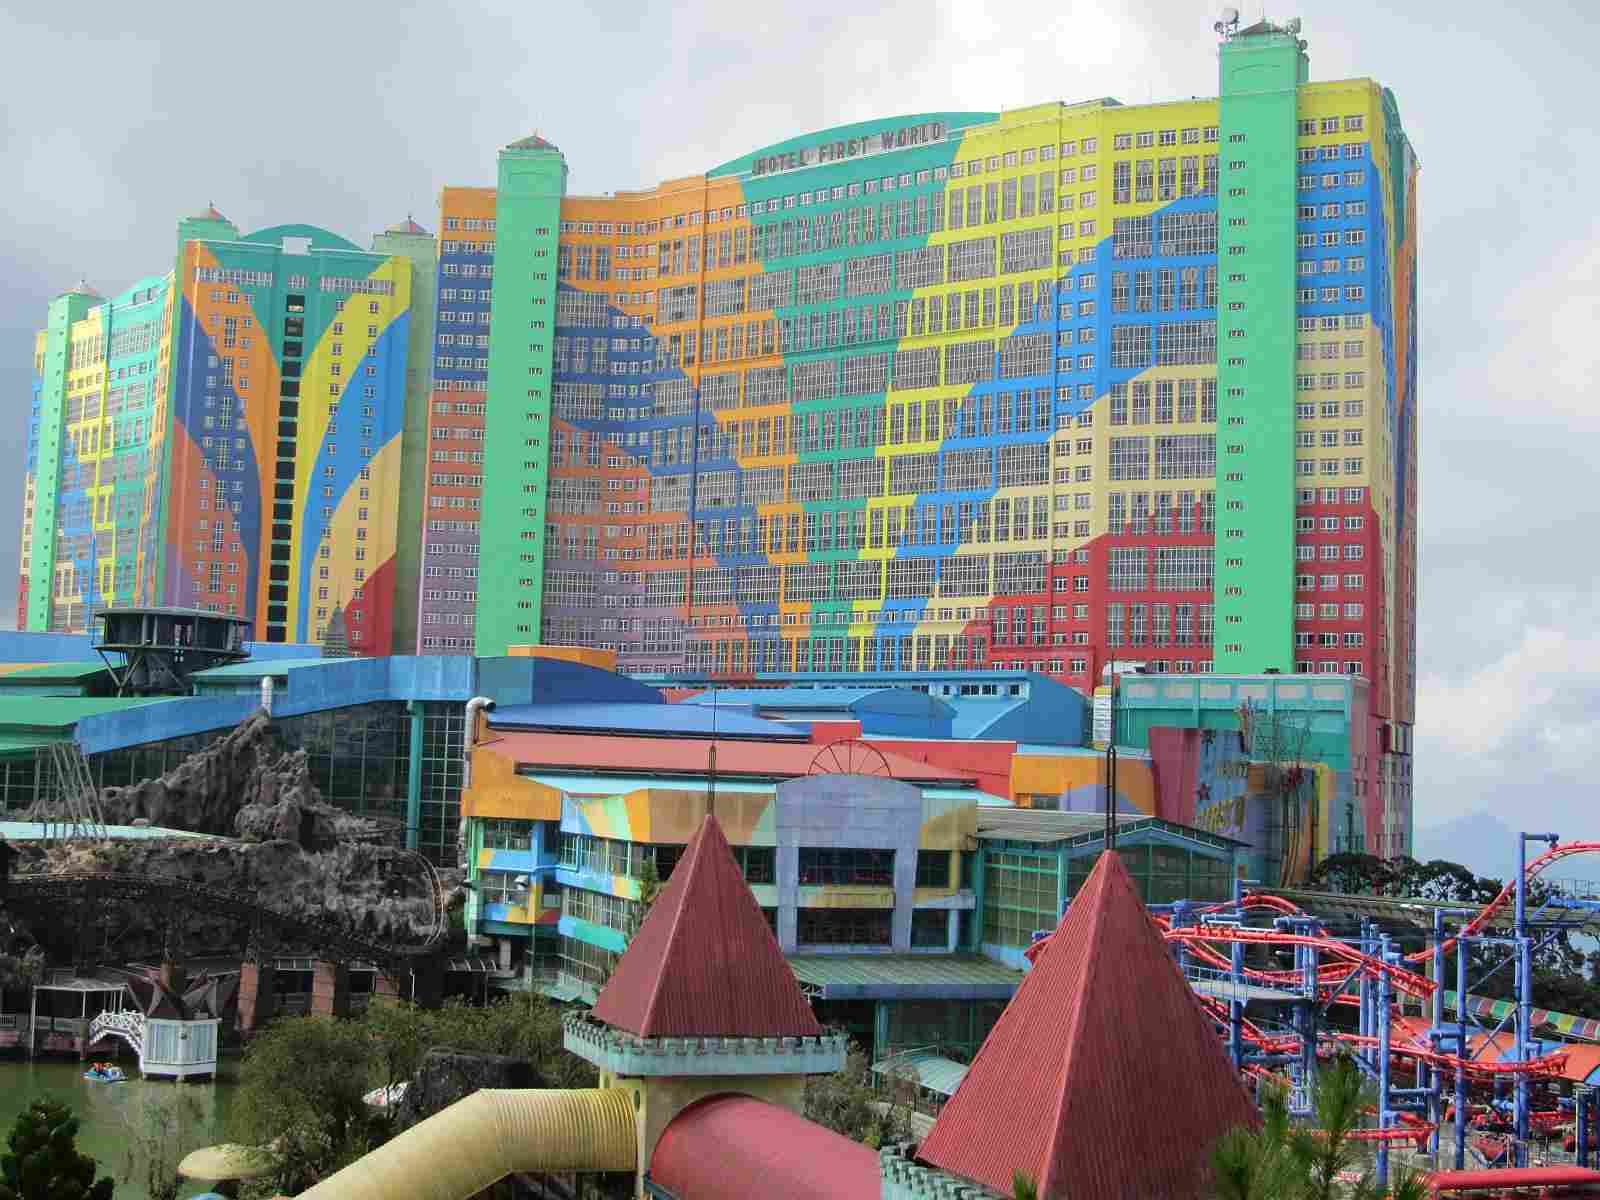 First World Hotel & Plaza: 8,584 rooms